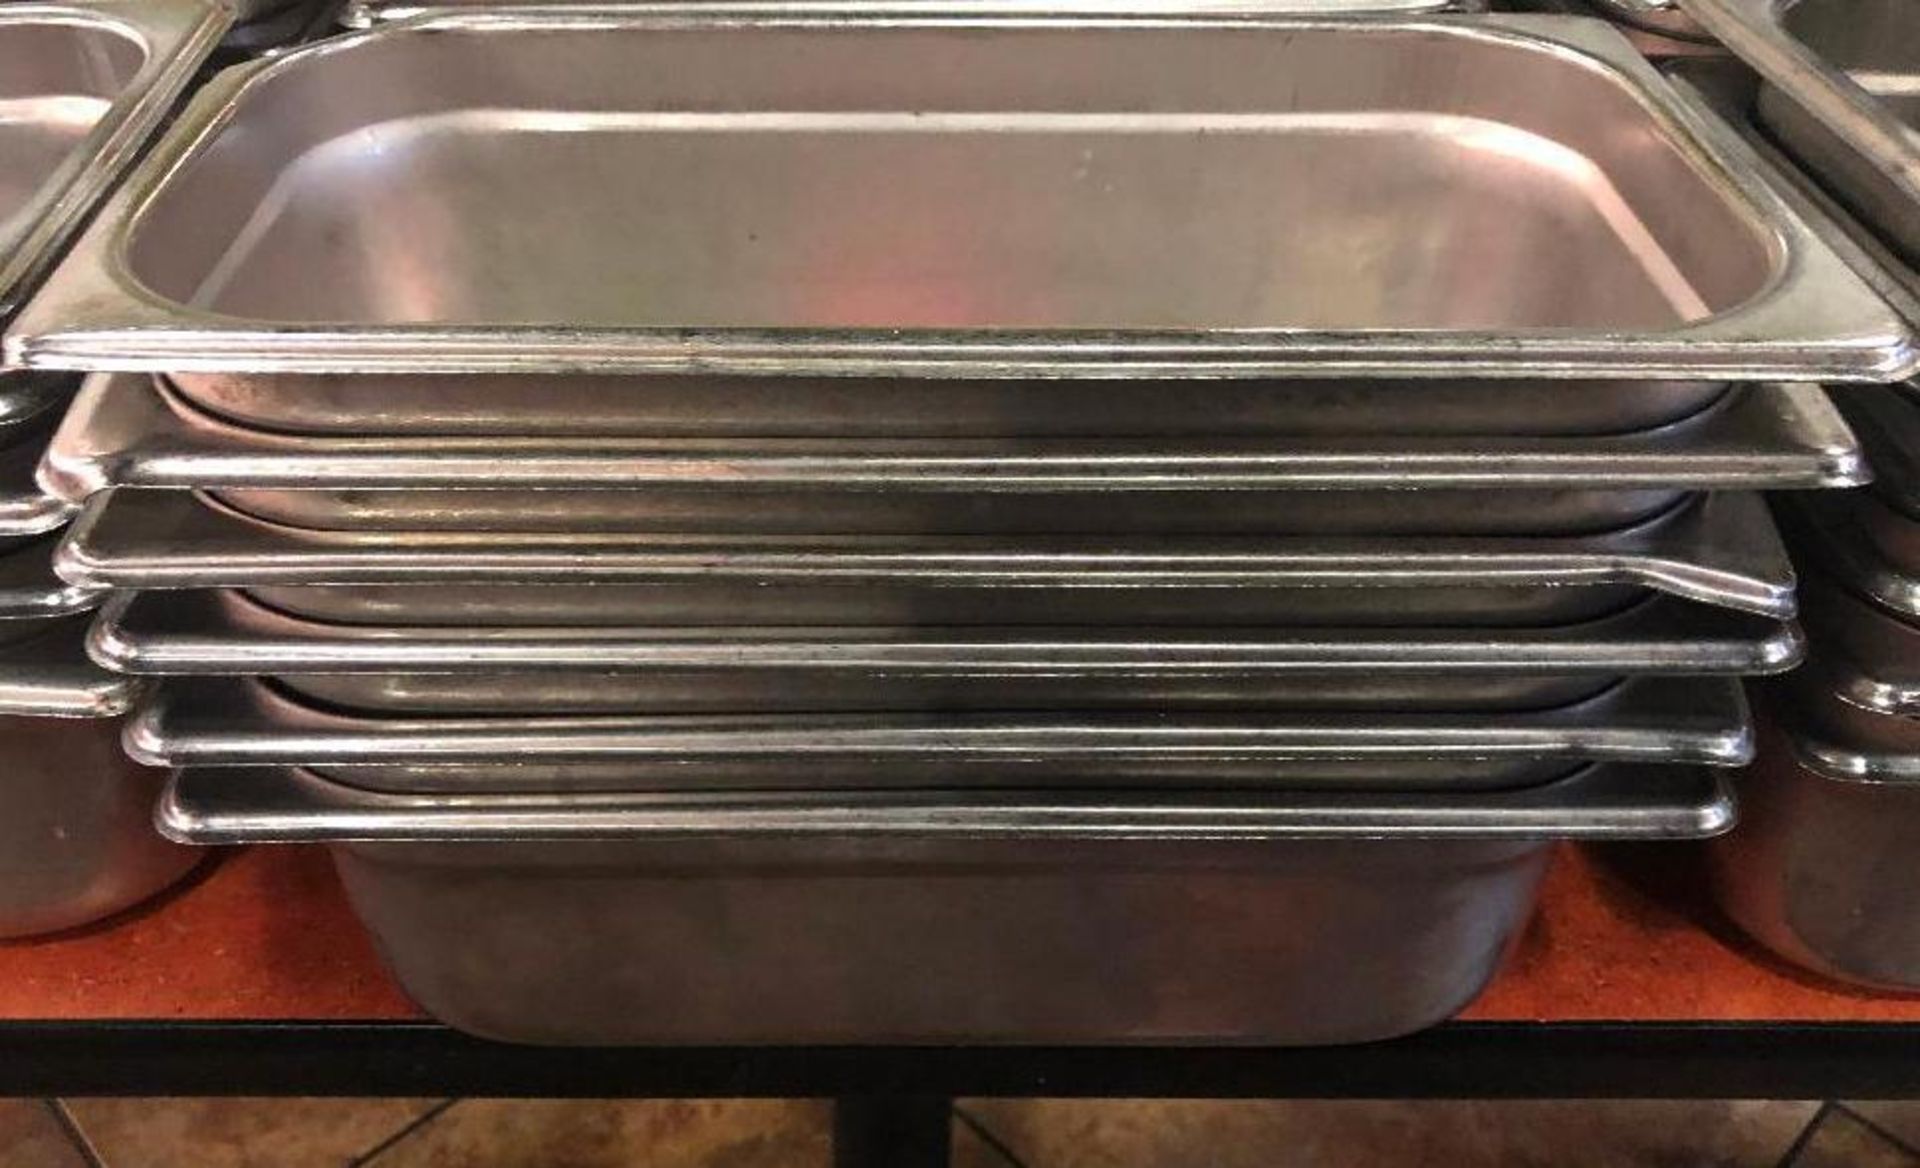 DESCRIPTION: (6) 1/3 SIZE STAINLESS INSERTS. NO LIDS SIZE: 4" DEEP LOCATION: MAIN SEATING THIS LOT I